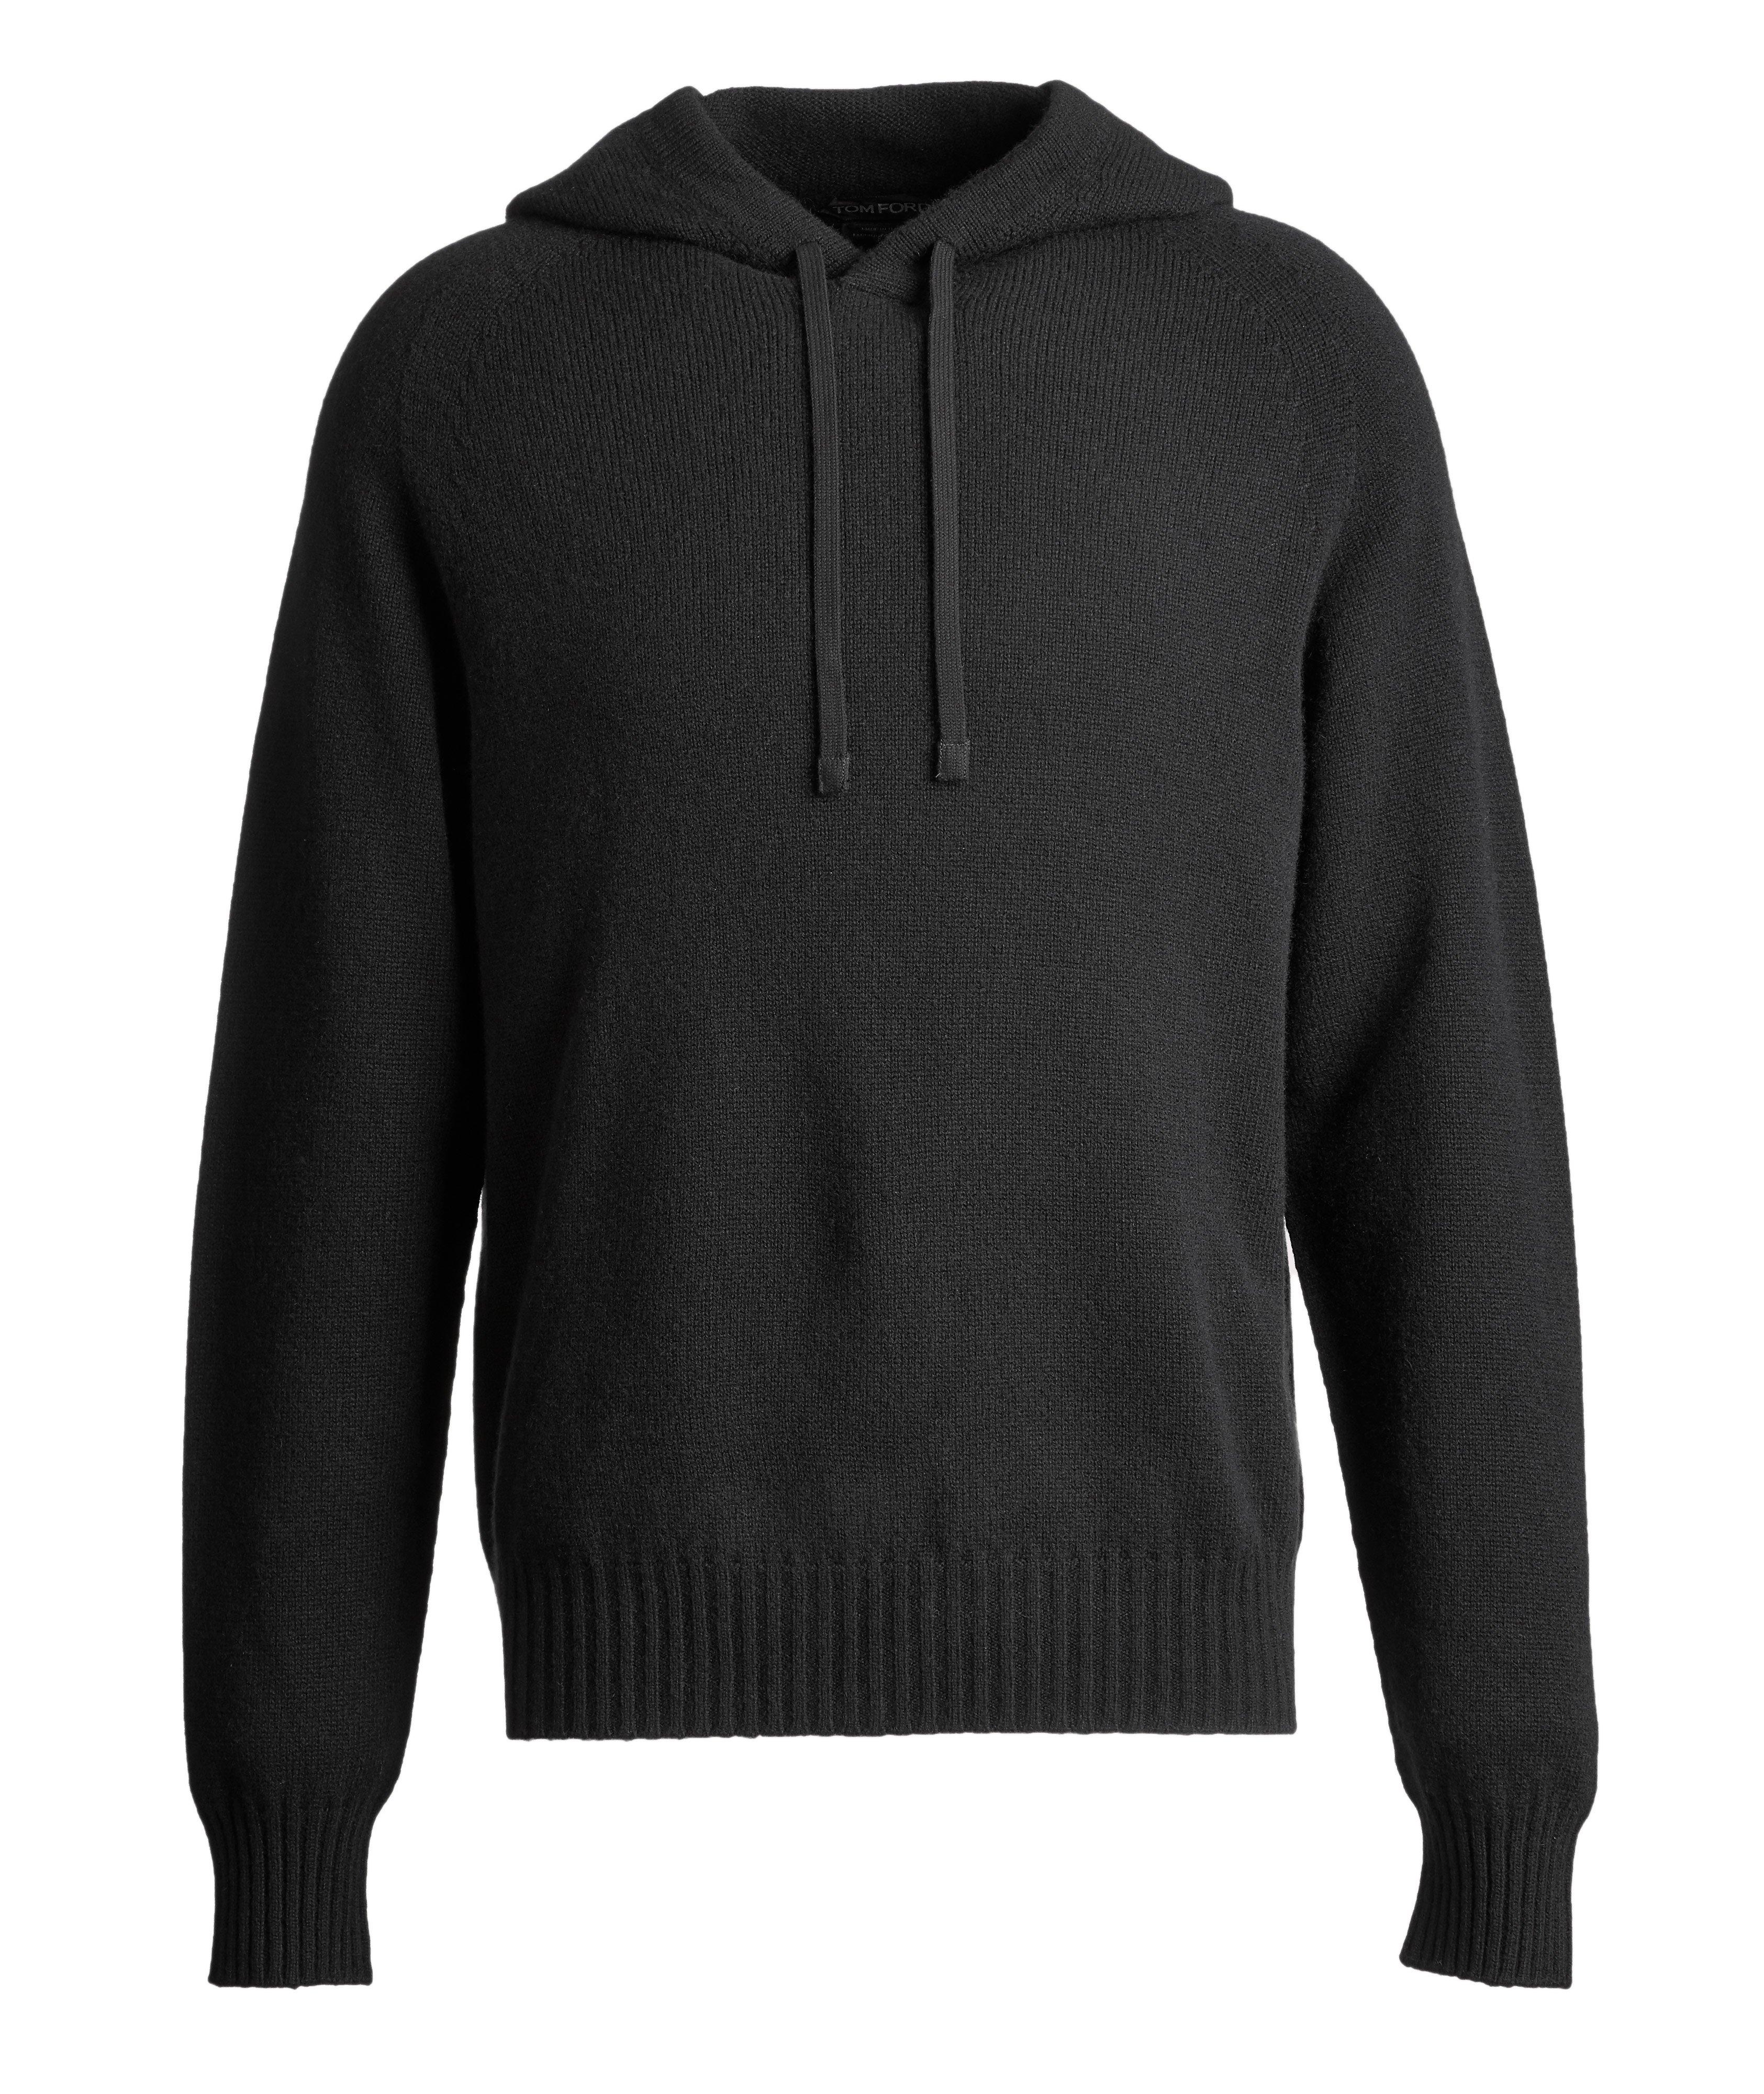 Knit Cashmere Hoodie image 0